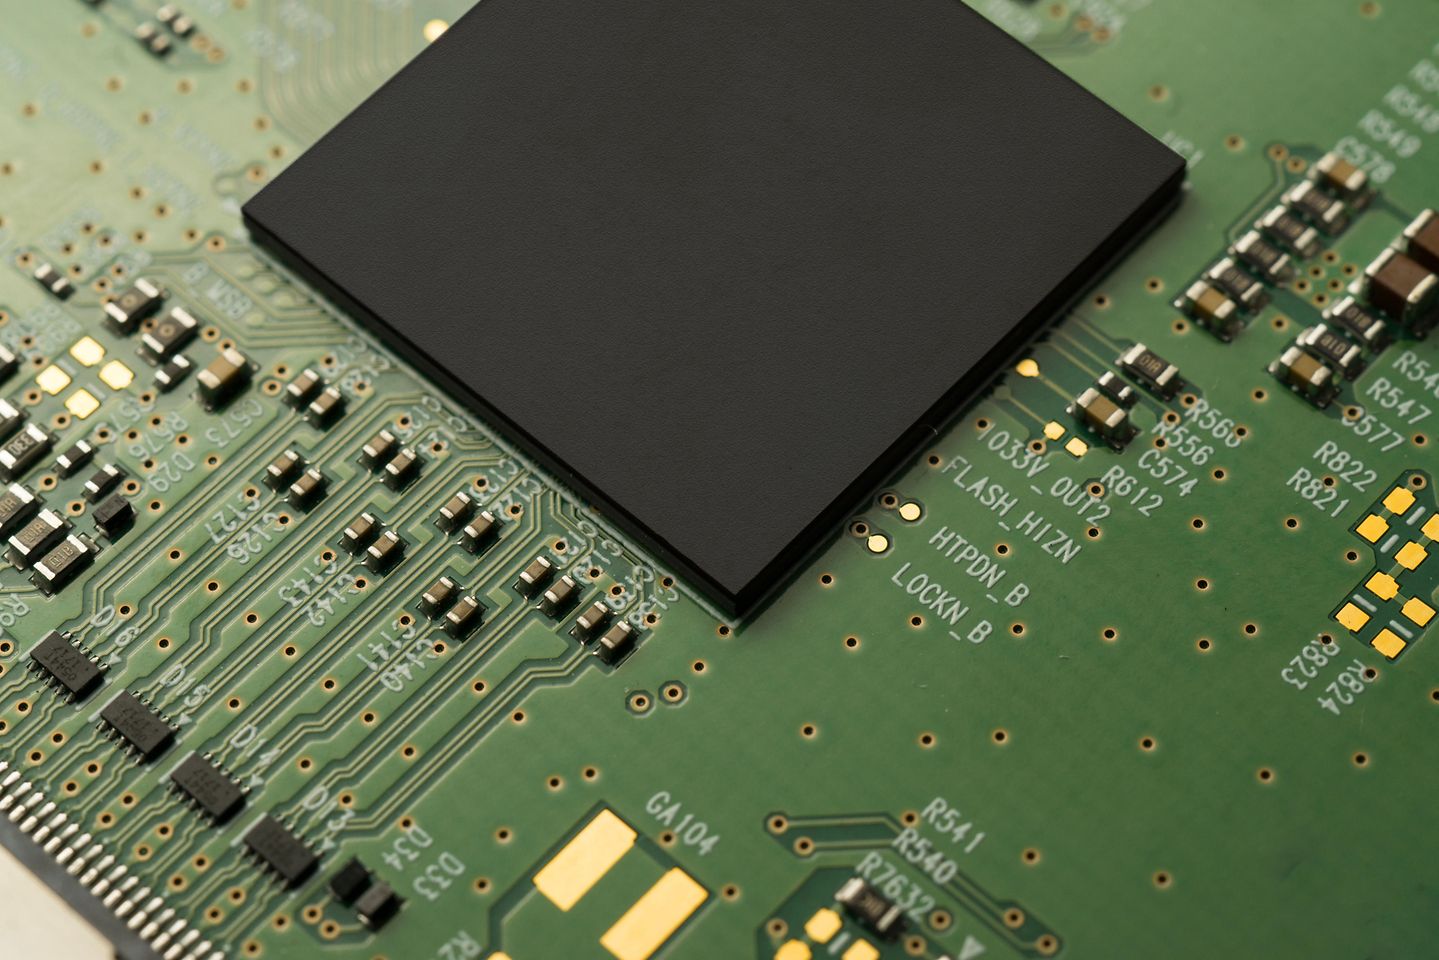 Solder Material Solutions – enabling excellent performance and reliability across a wide spectrum of product builds